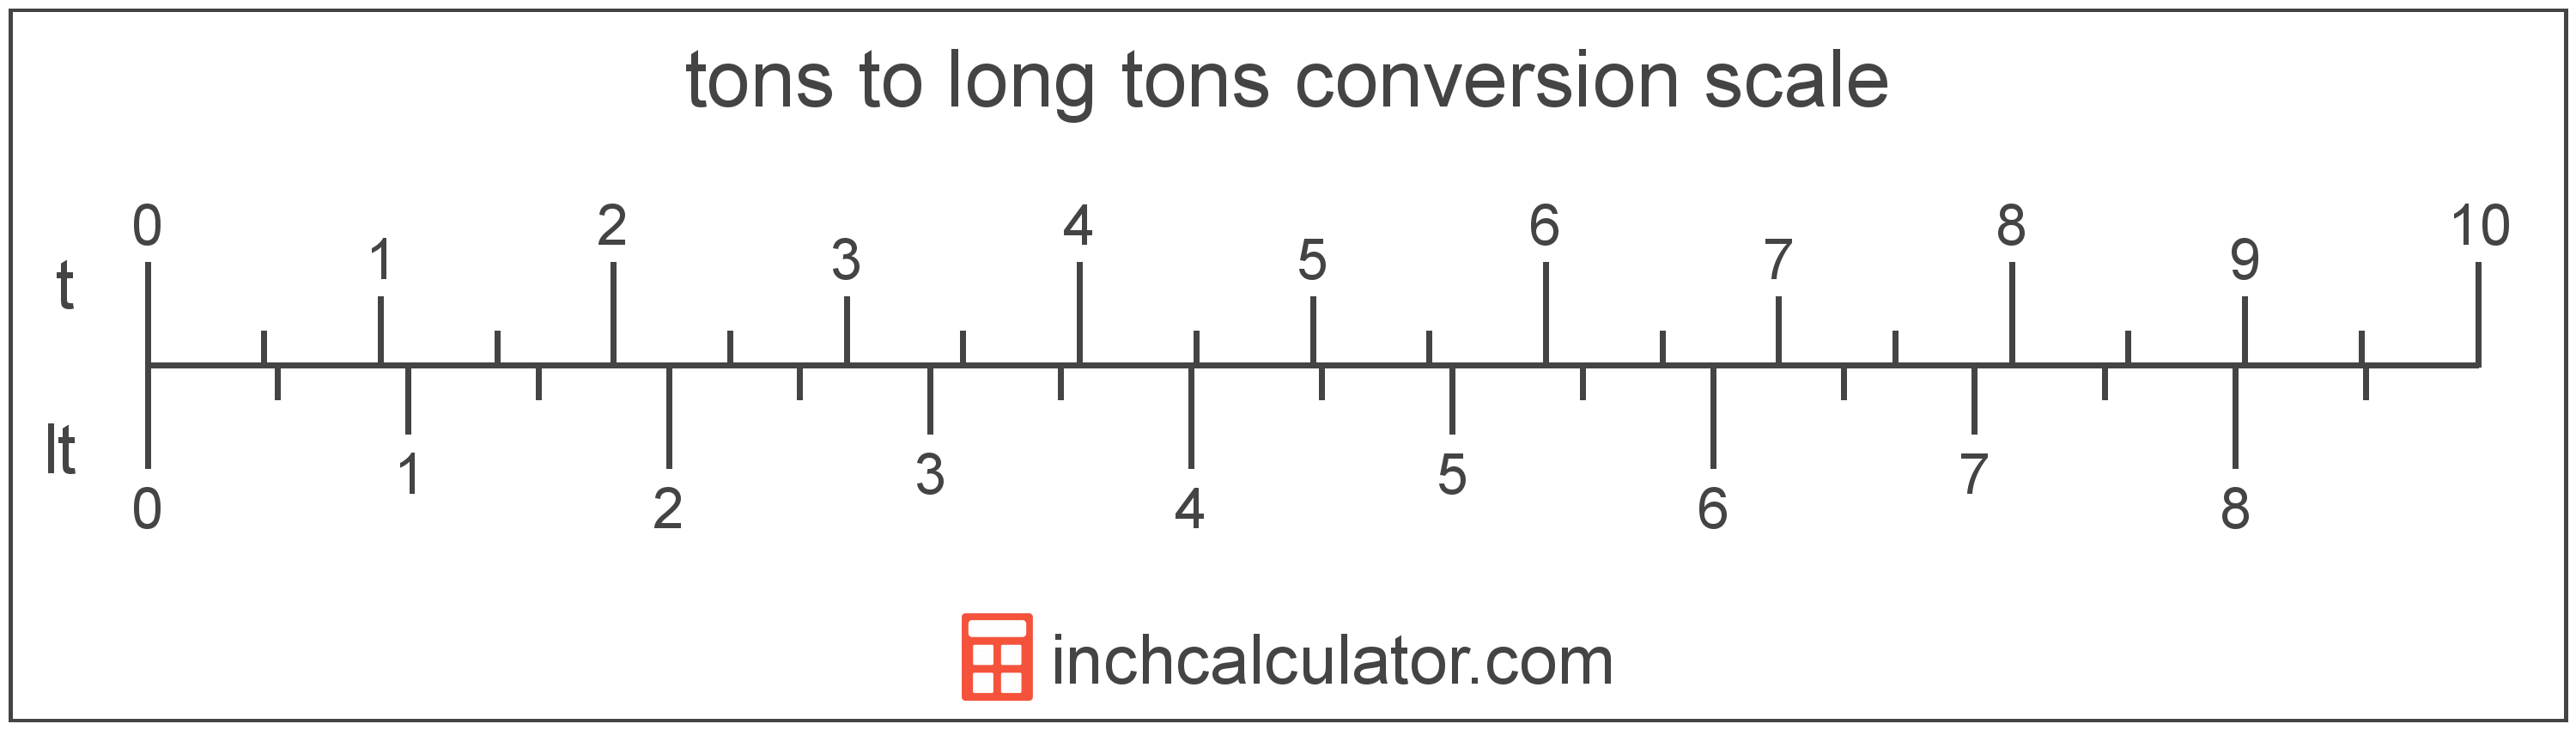 conversion scale showing tons and equivalent long tons weight values